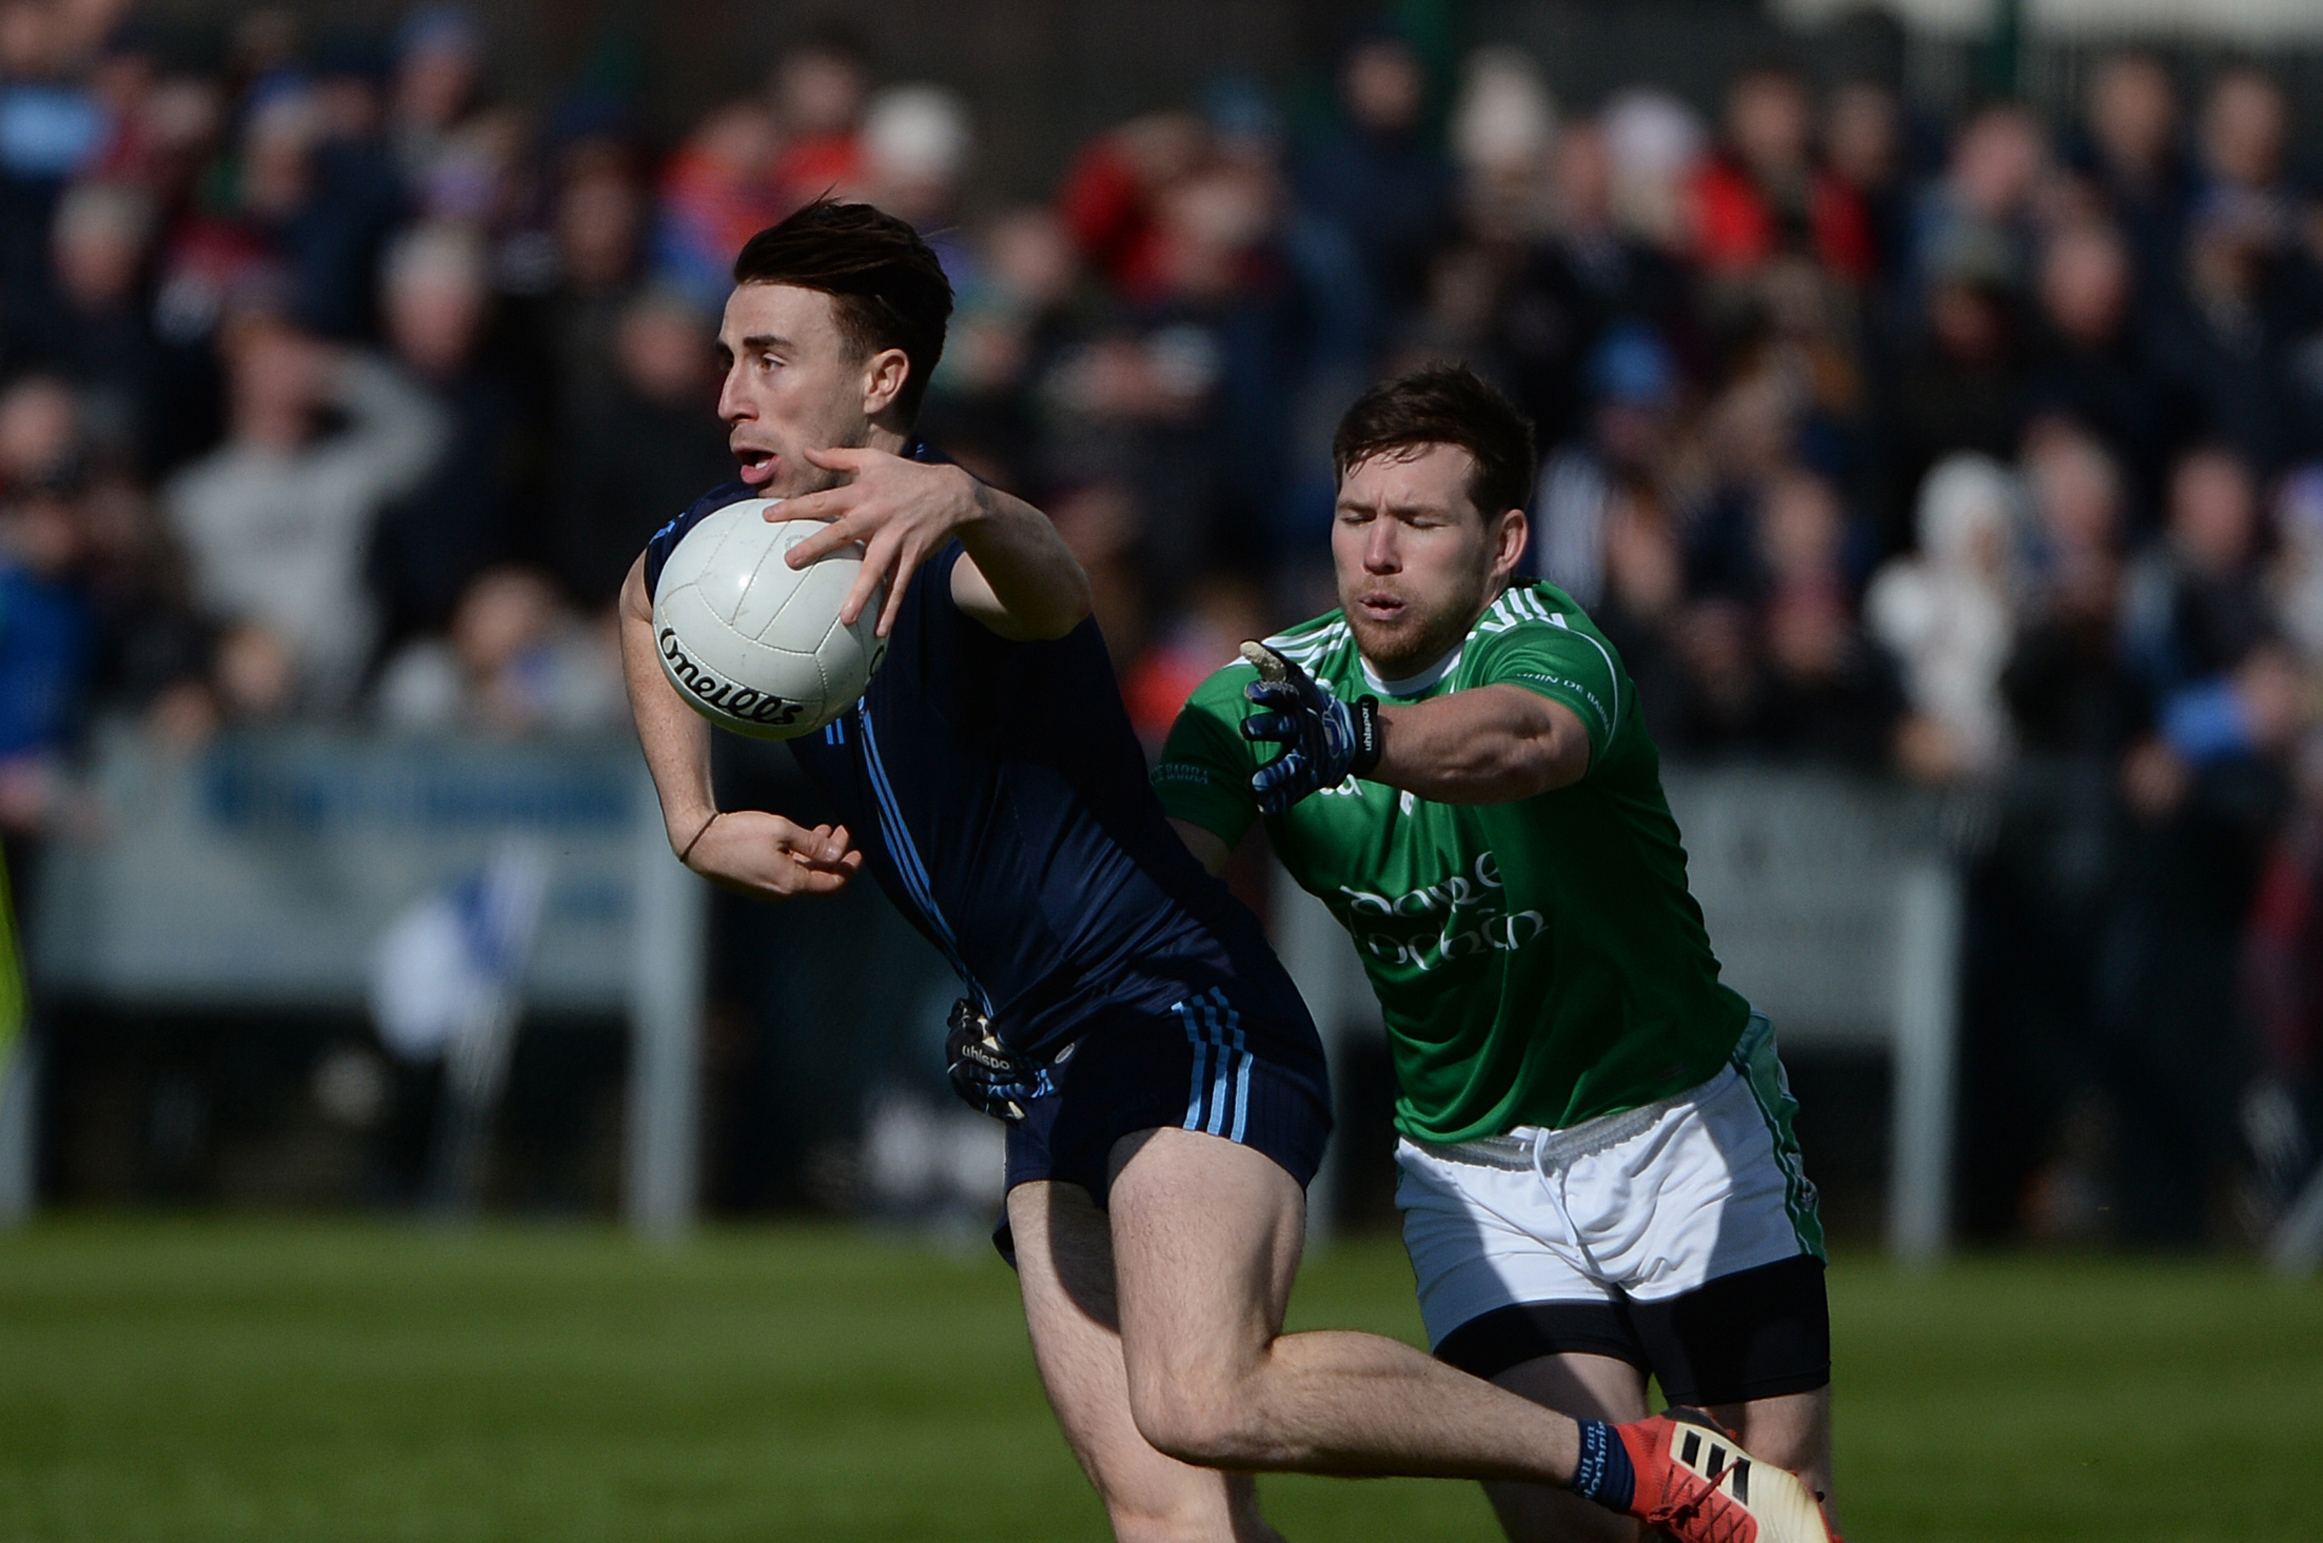 St Mary’s to lock horns with Donaghmore